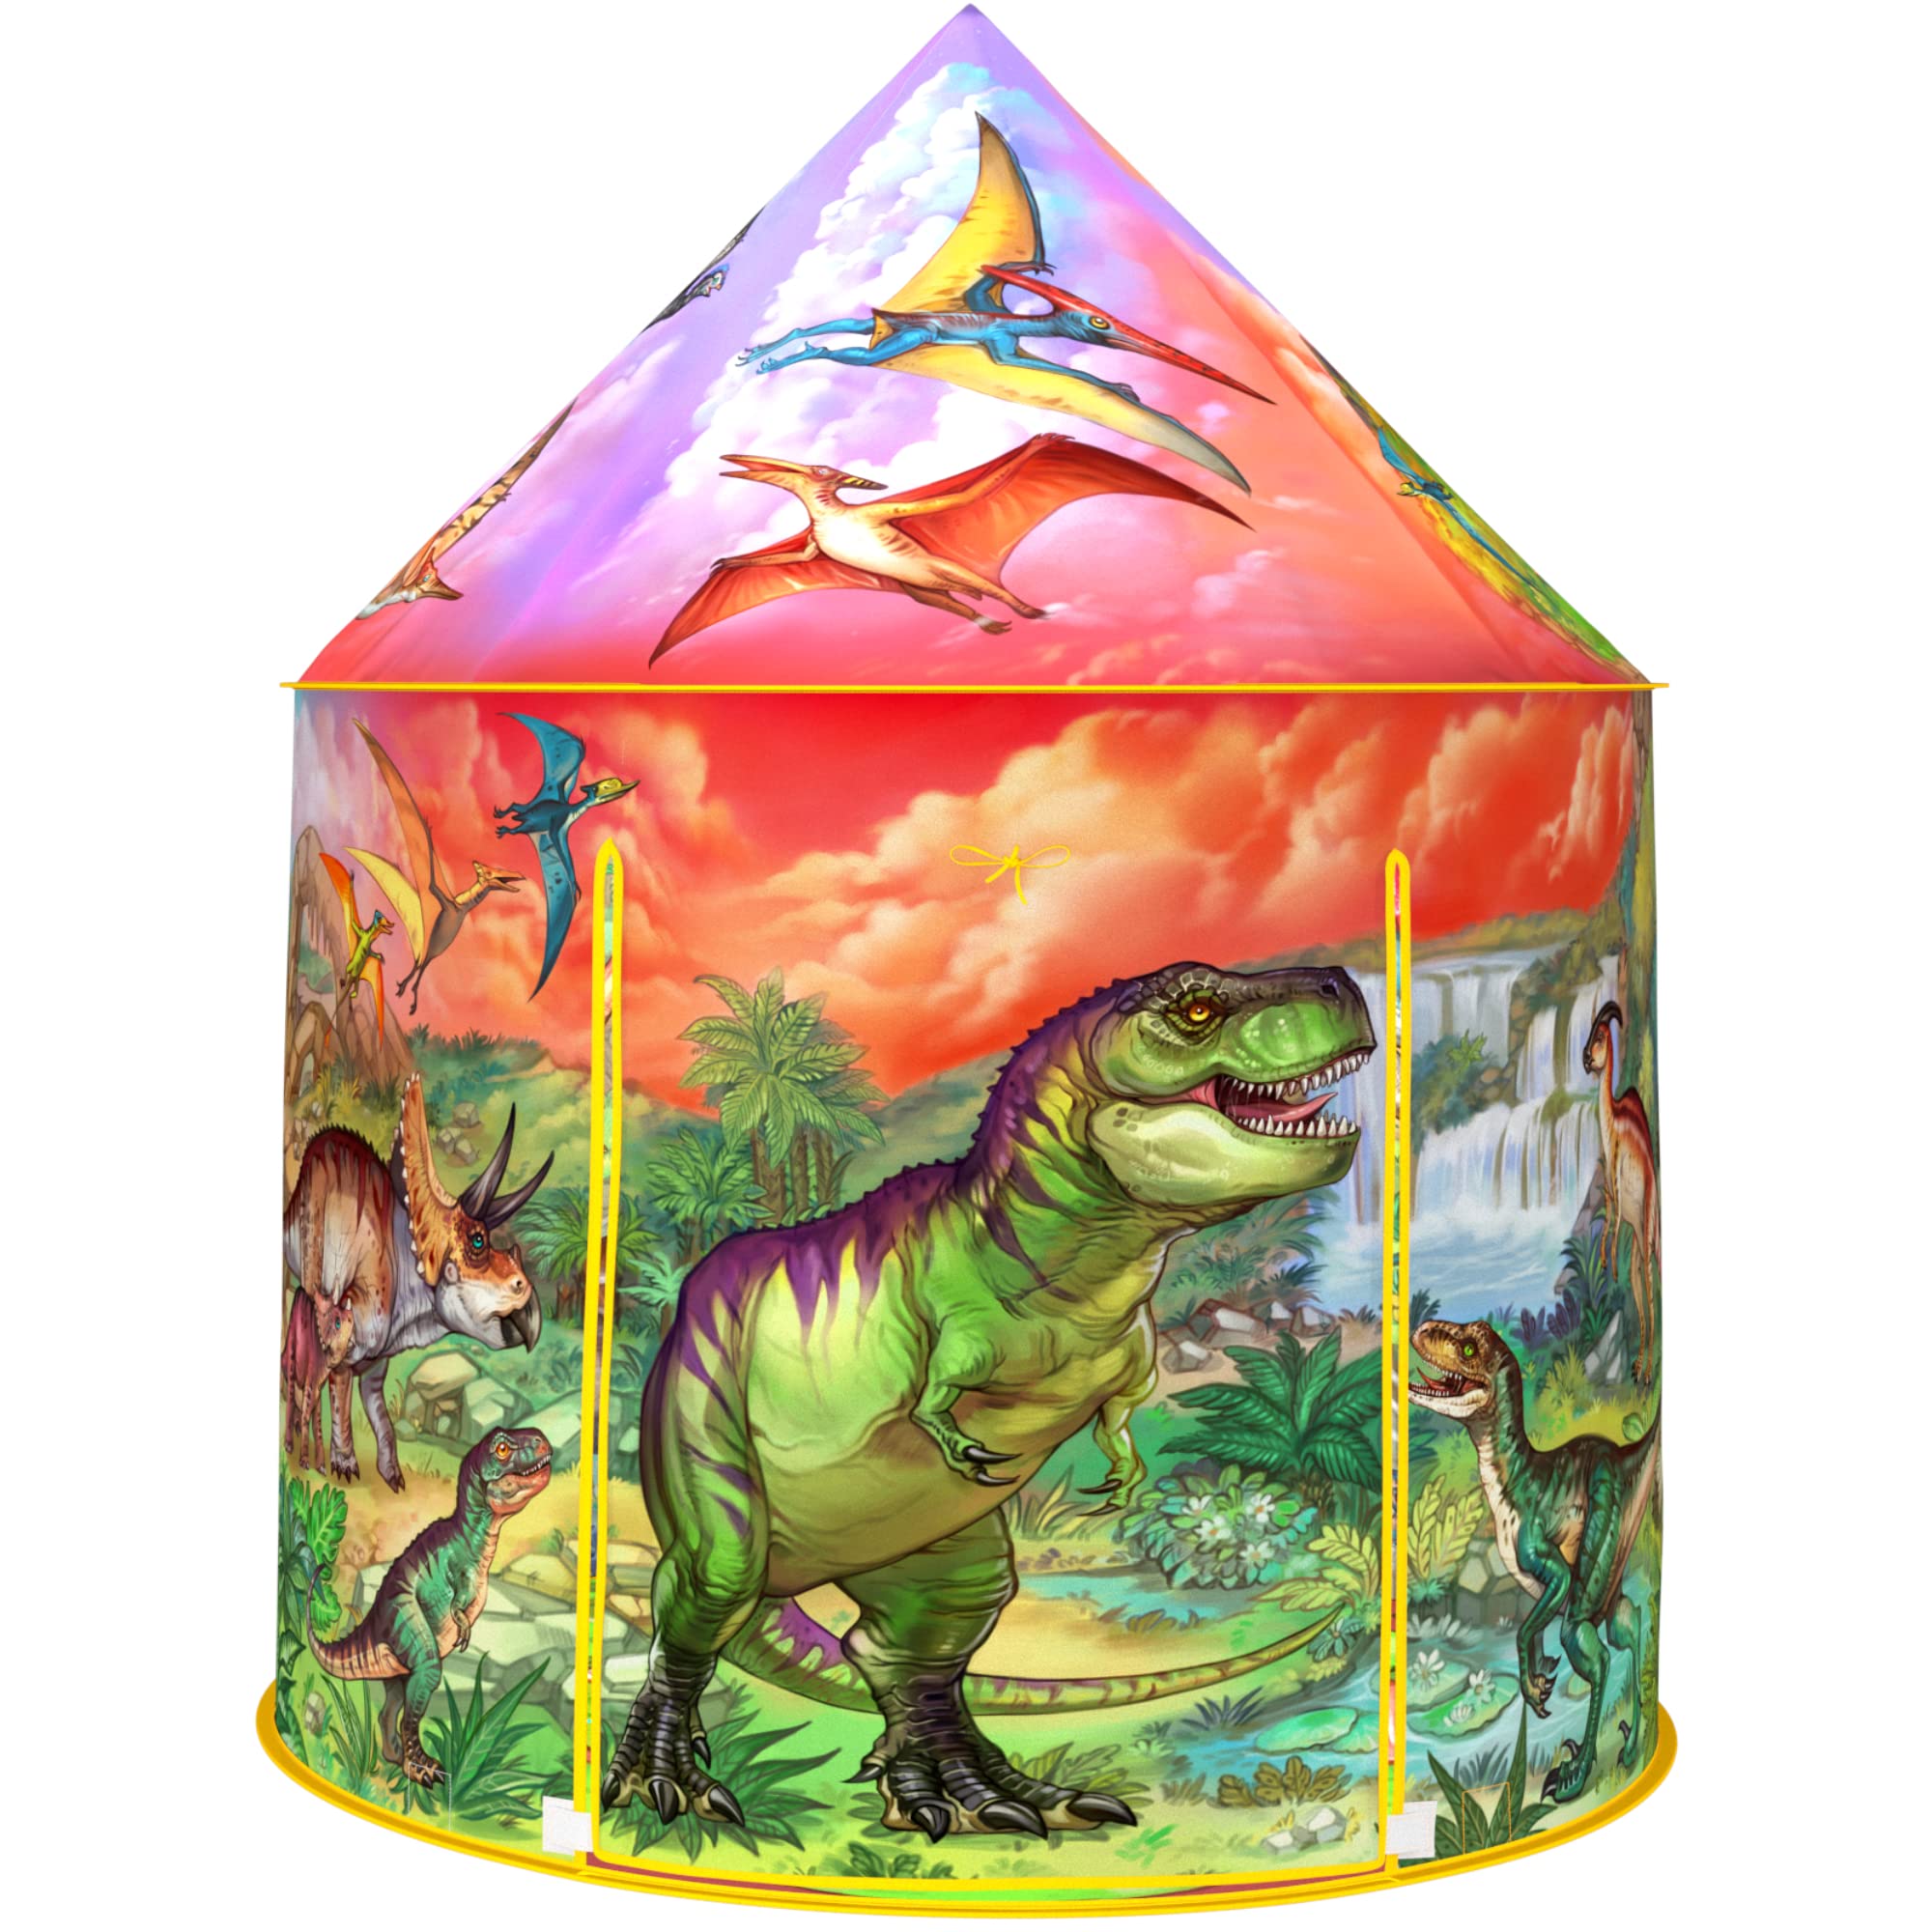 ImpiriLux Dinosaur Play Tent for Boys and girls with Mask & cape costume  Dino Pop Up Fort Playhouse and Storage Bag